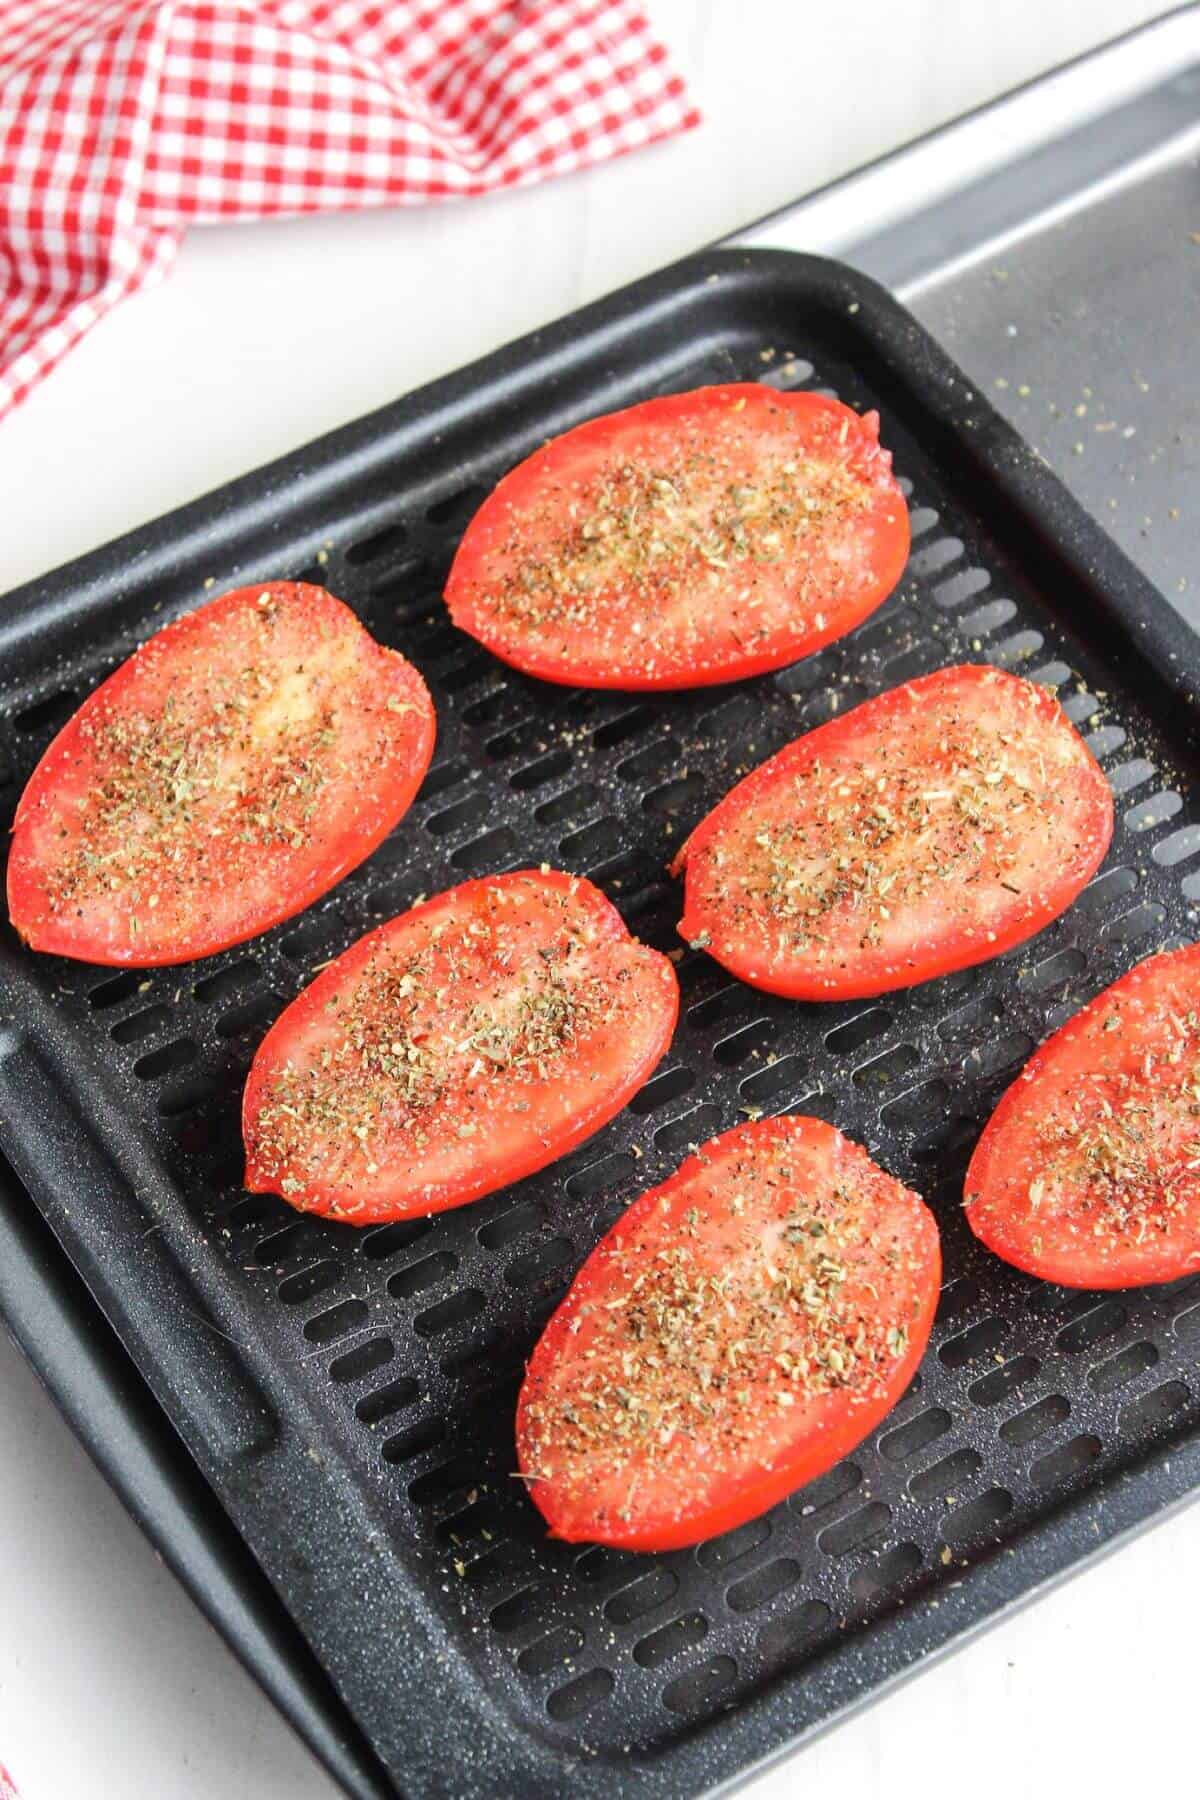 Tomatoes on an air fryer tray with a checkered checkered tablecloth.